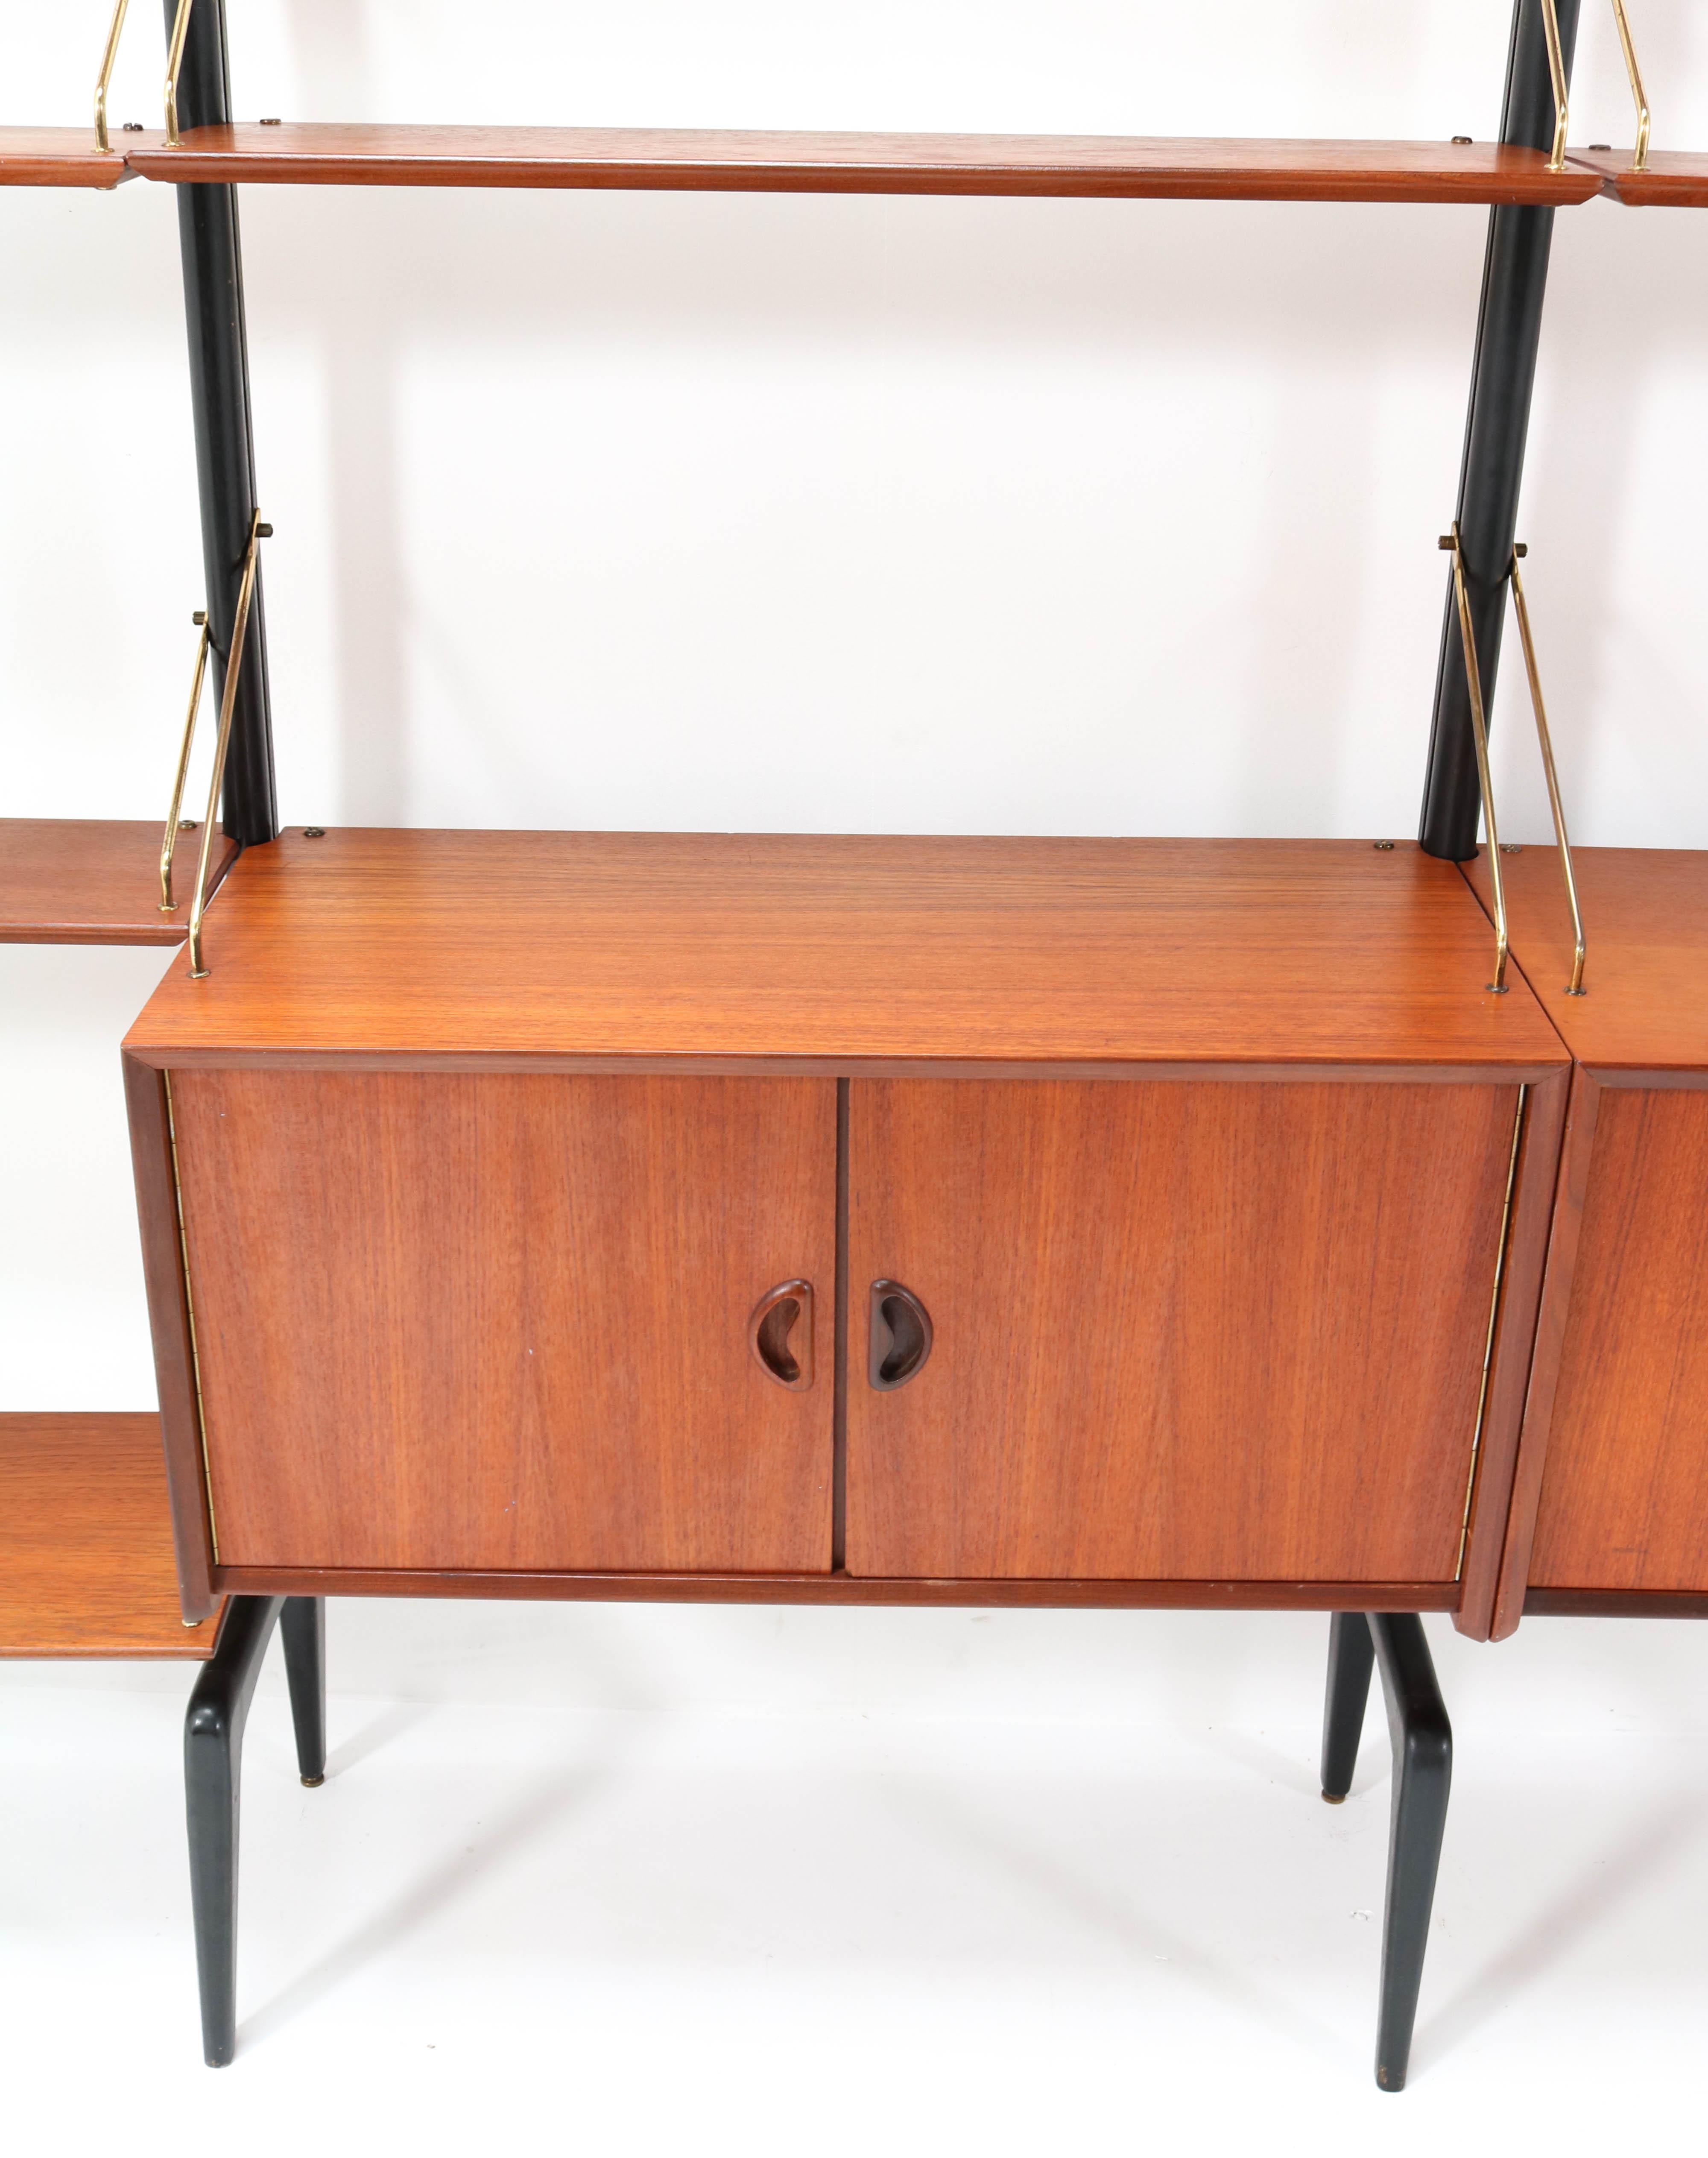 Mid-20th Century Large Mid-Century Modern Free Standing Wall Unit by Louis Van Teeffelen for WéBé